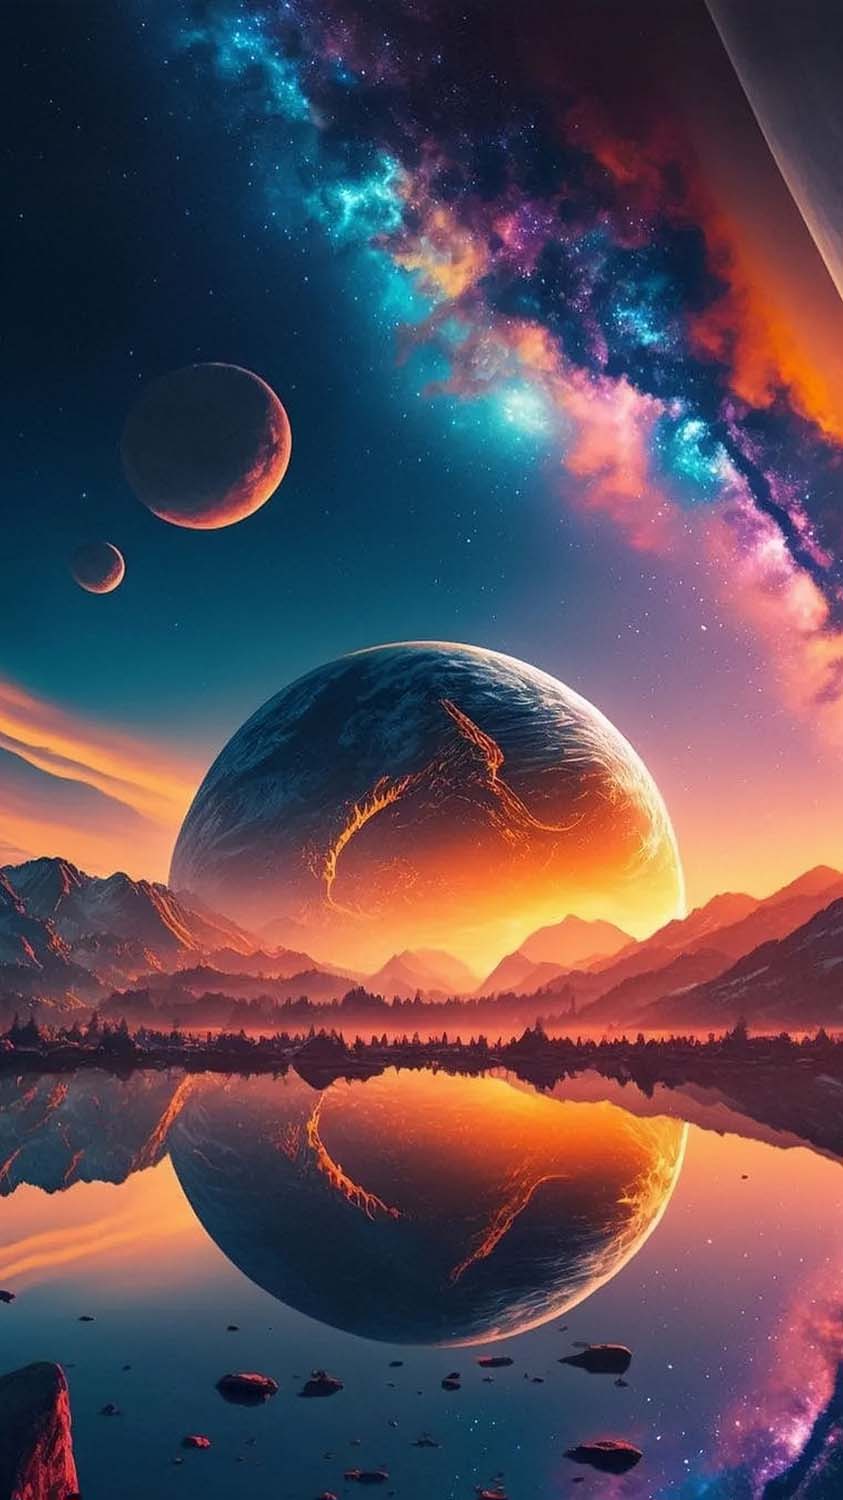 Planet Reflection in Lake iPhone Wallpaper HD